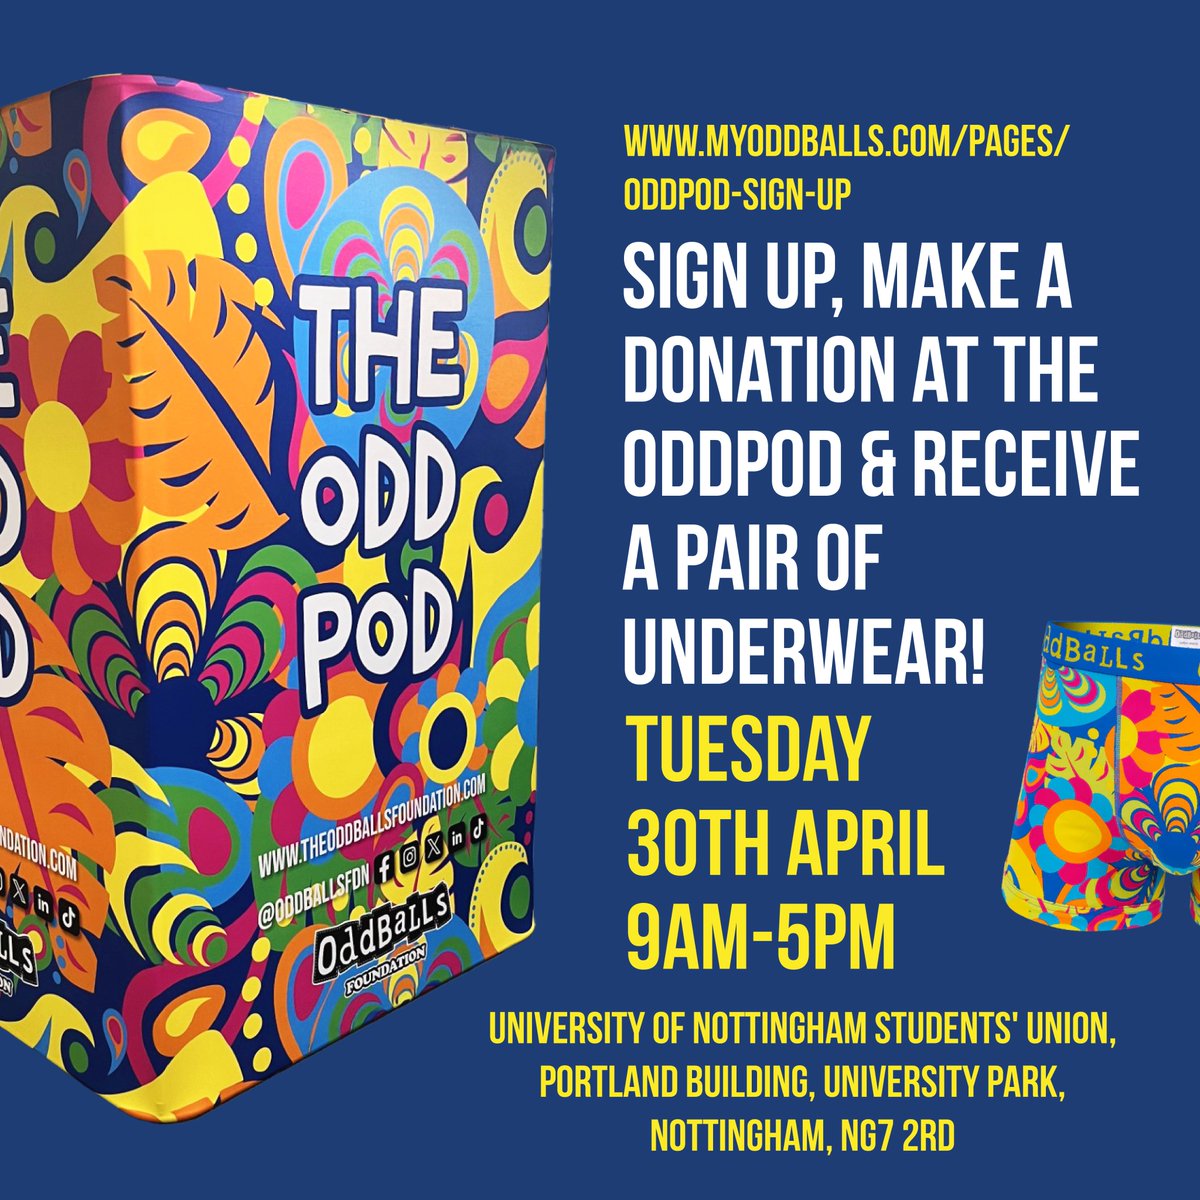 The OddPod is coming to the University of Nottingham! 👀 📍 University of Nottingham Students’ Union, NG7 2RD 🗓️ Tuesday 30th April ⌚️ 9am - 5pm Sign up to get your underwear here - myoddballs.com/pages/oddpod-s…. ✅ Donations can be made at the event. 🙌